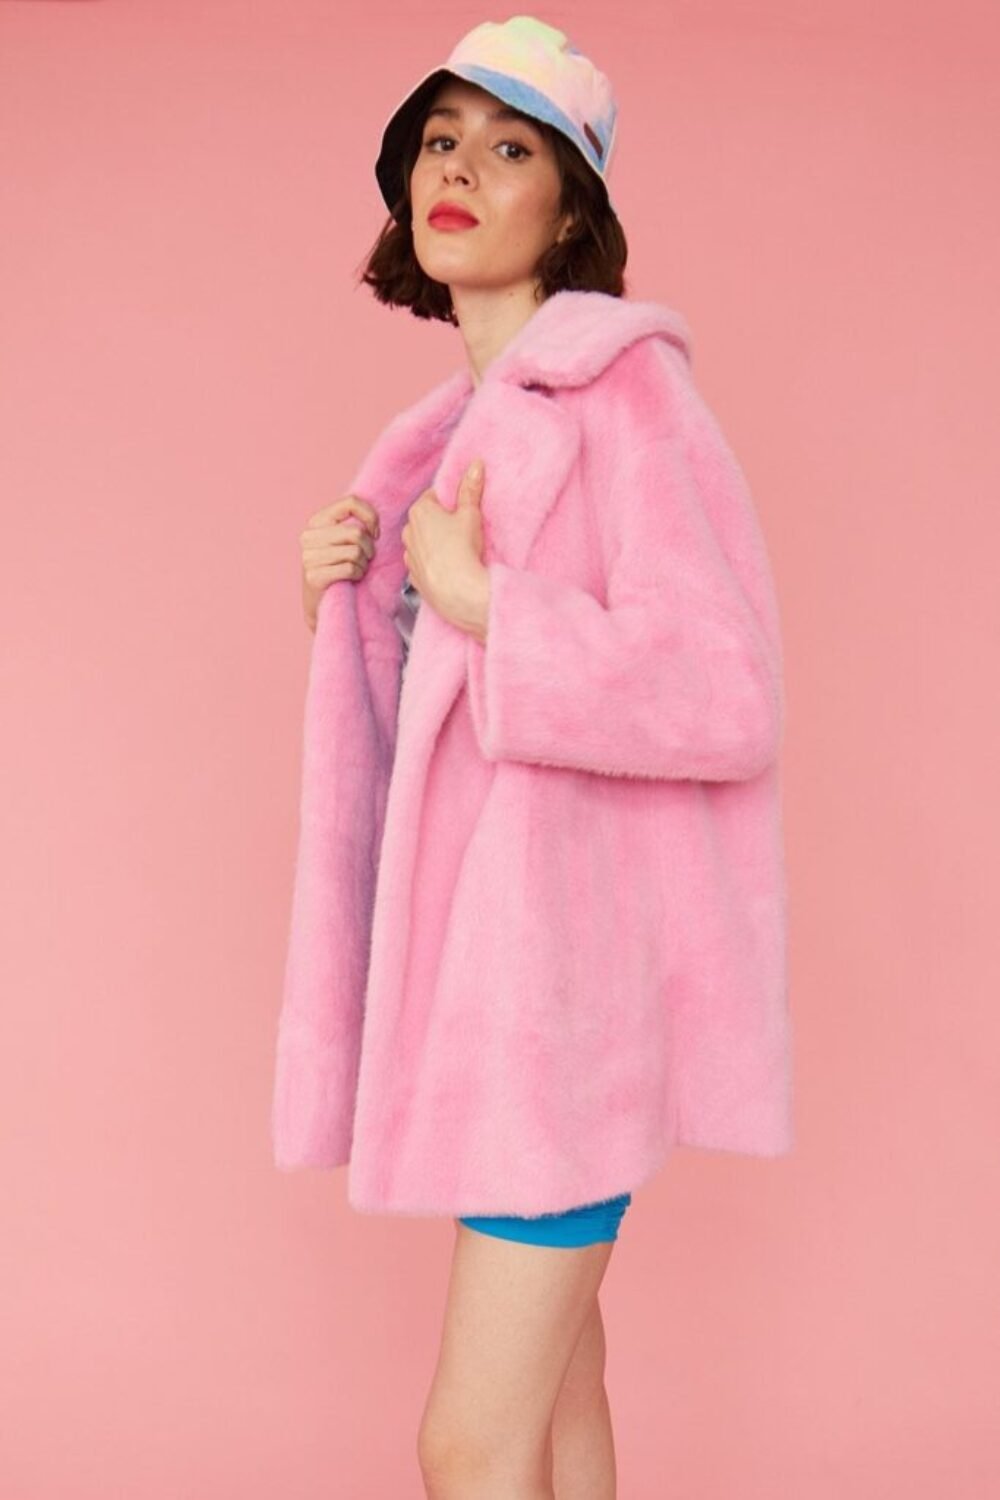 Shop Lux Pink Faux Fur Duchess Midi Coat and women's luxury and designer clothes at www.lux-apparel.co.uk